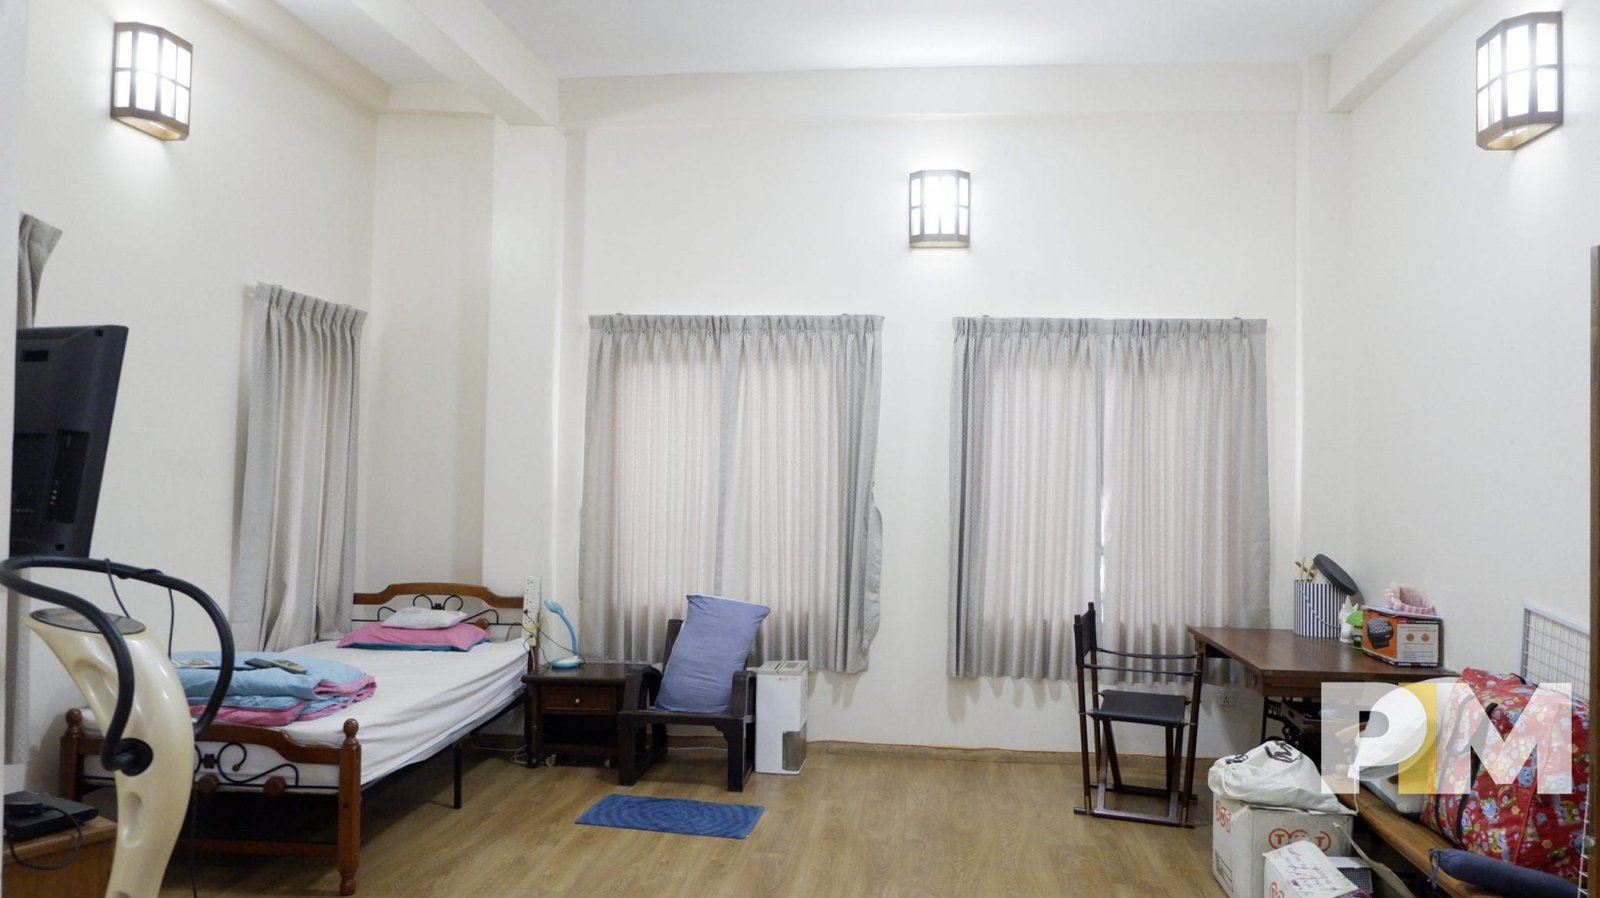 Bedroom with working table - Yangon Real Estate